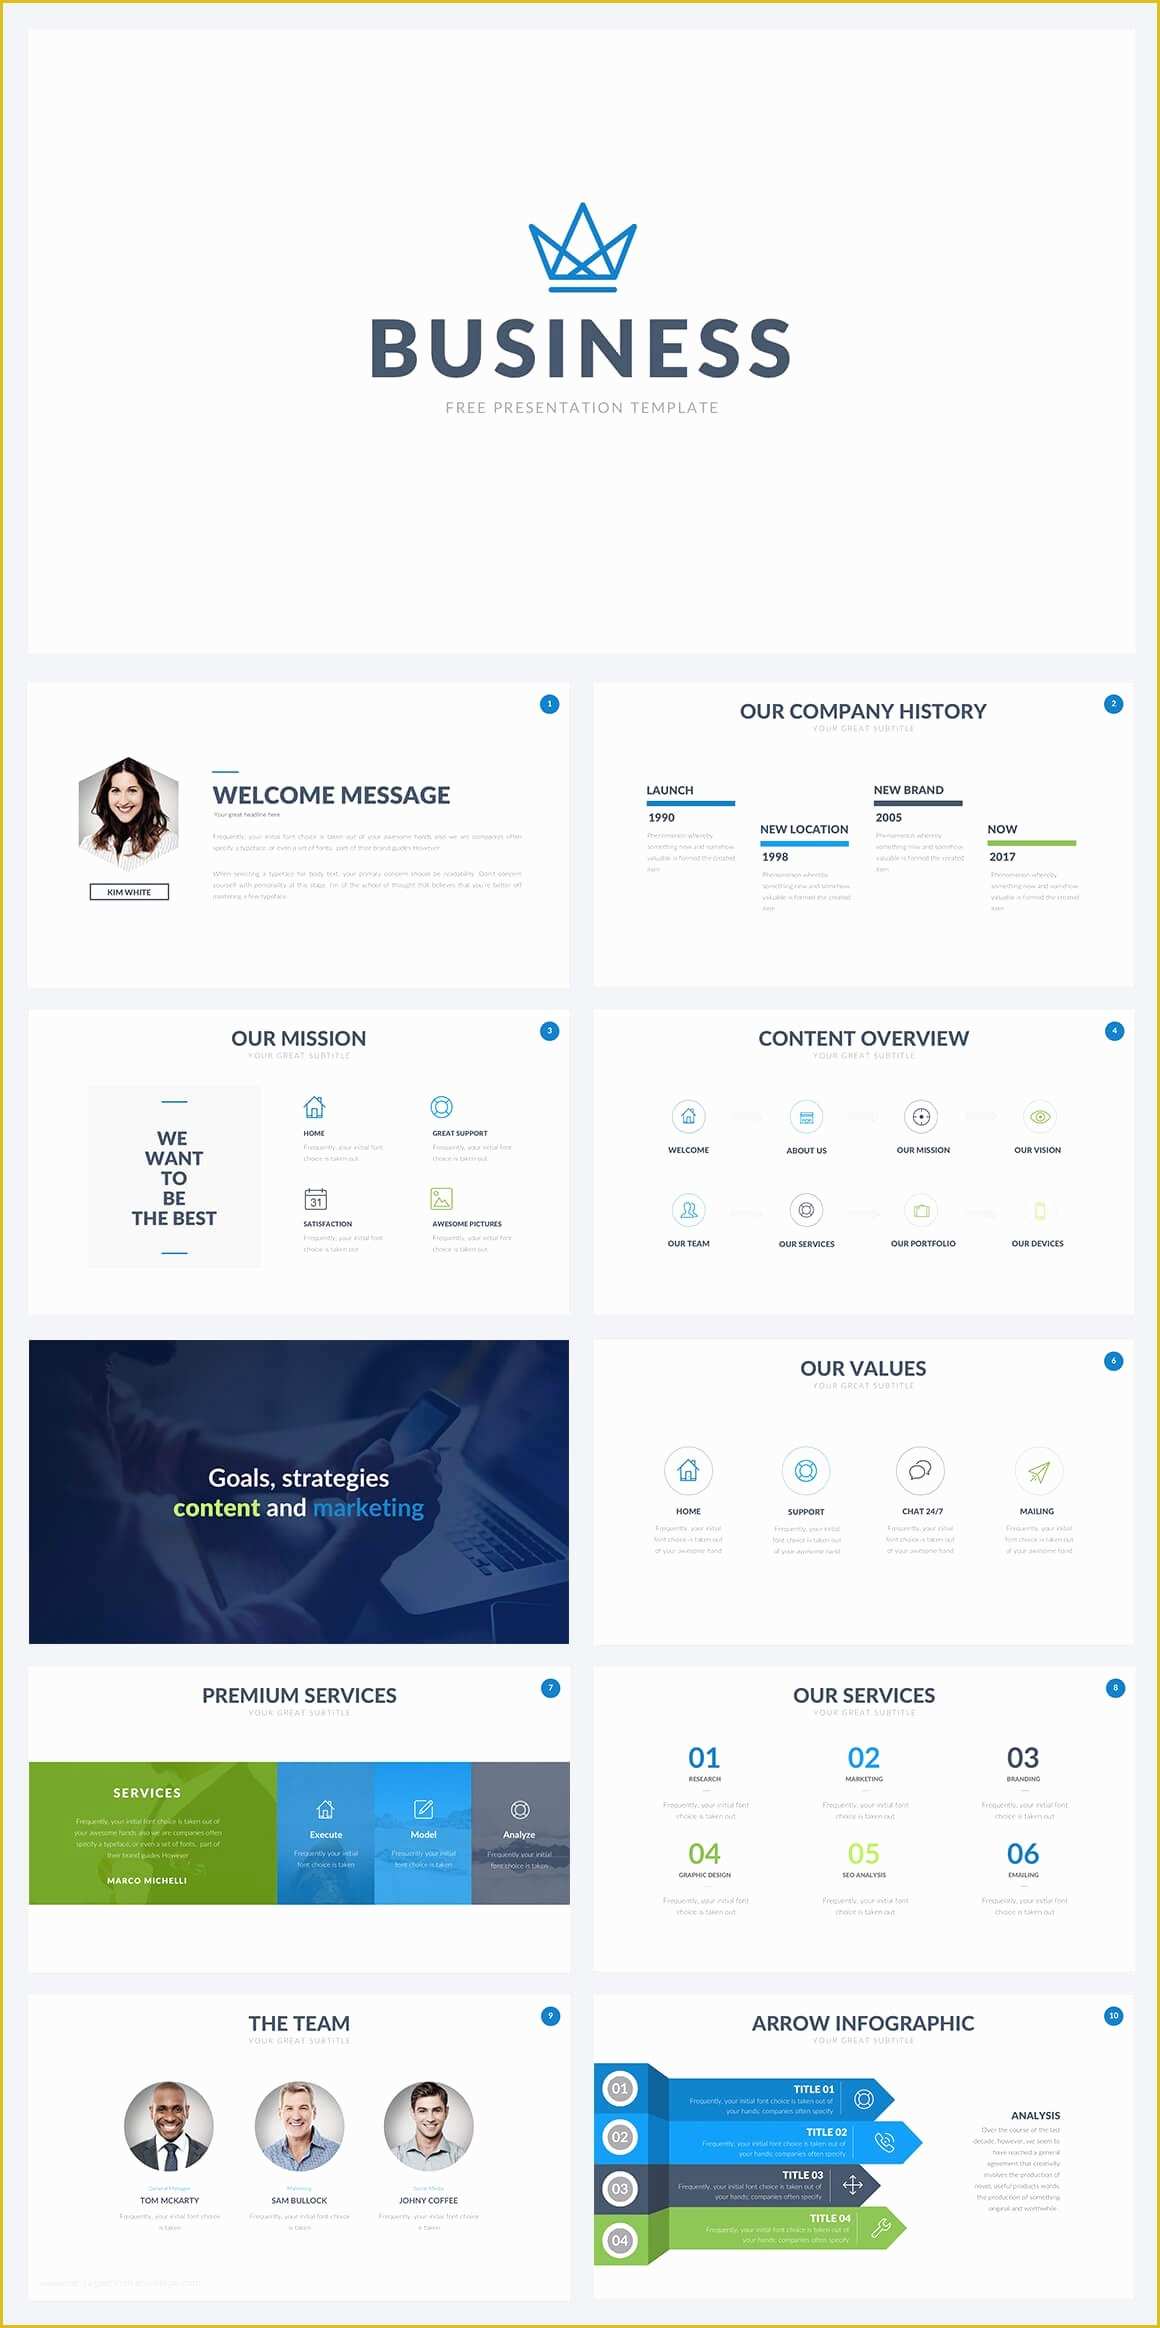 Free Online Powerpoint Templates Of 40 Free Cool Powerpoint Templates for Presentations